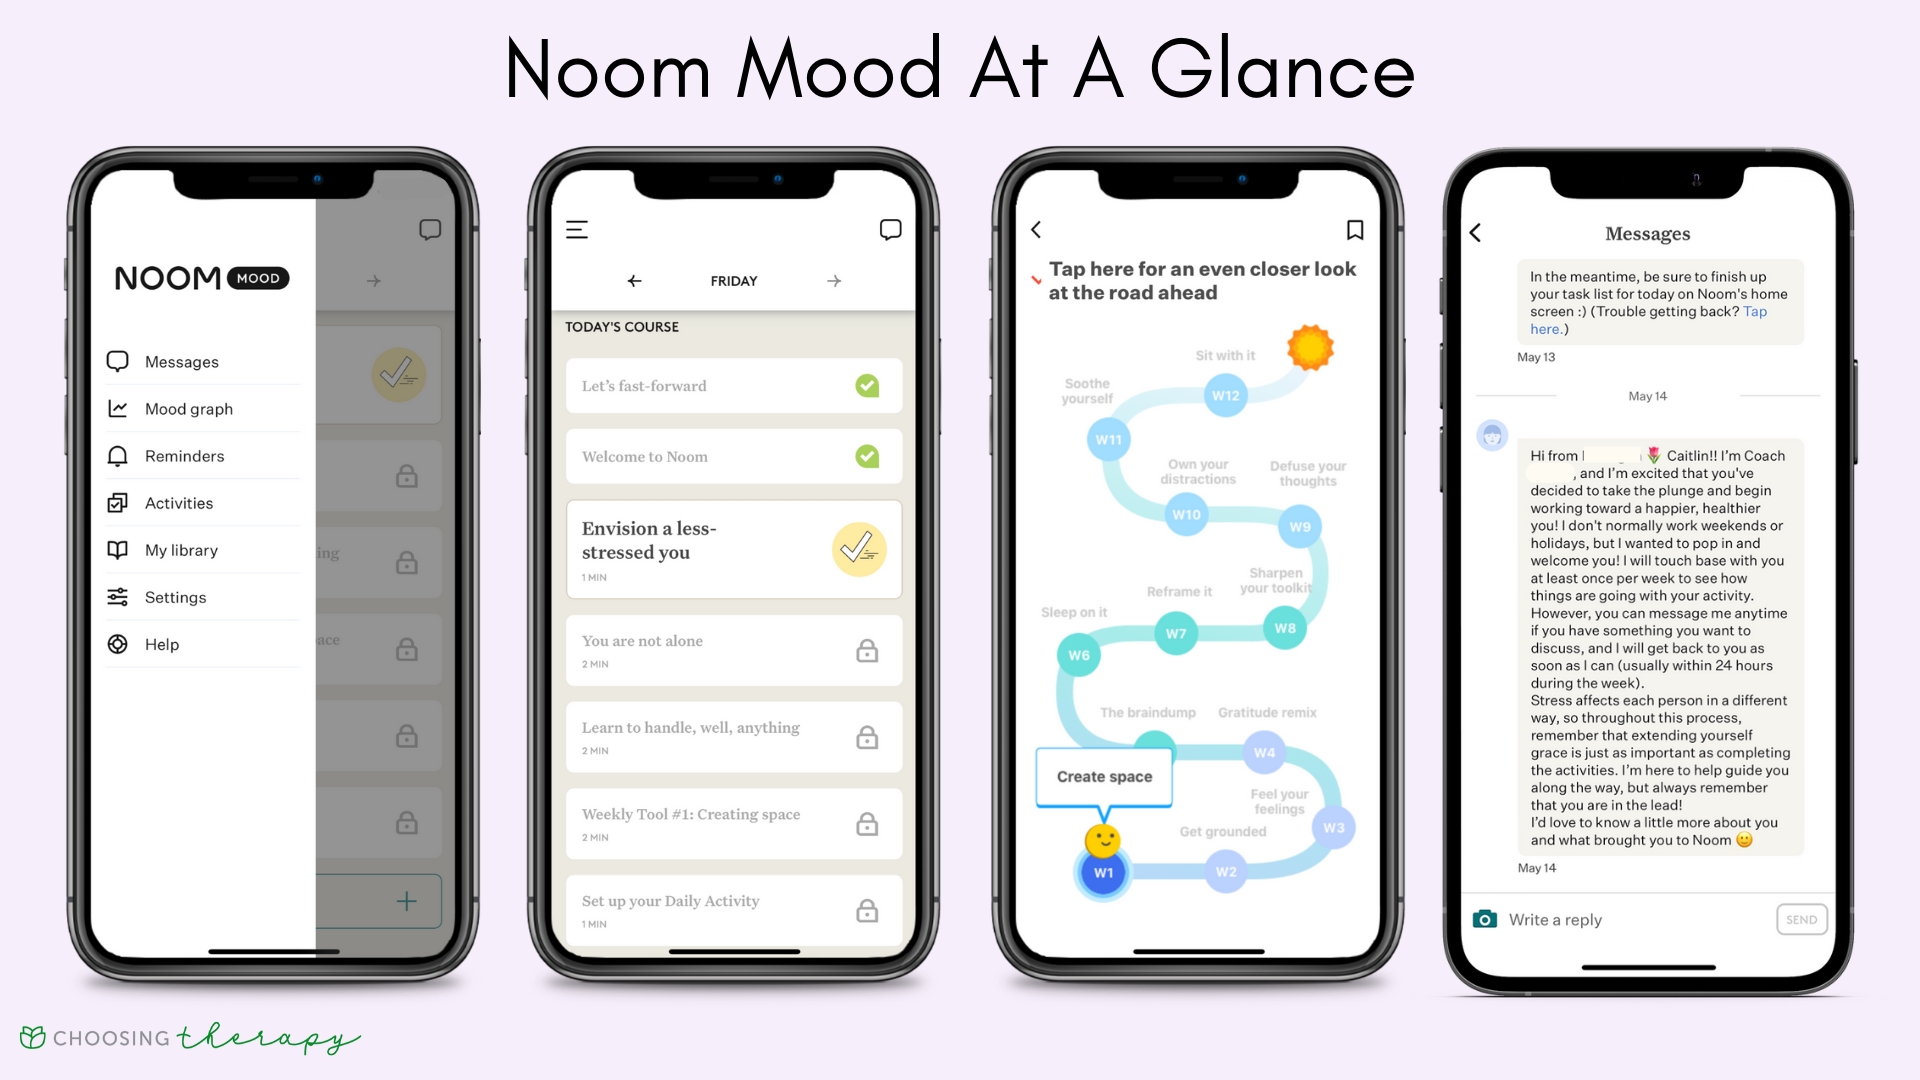 Noom Mood Review 2022: Pros & Cons, Cost, & Who It's Right For